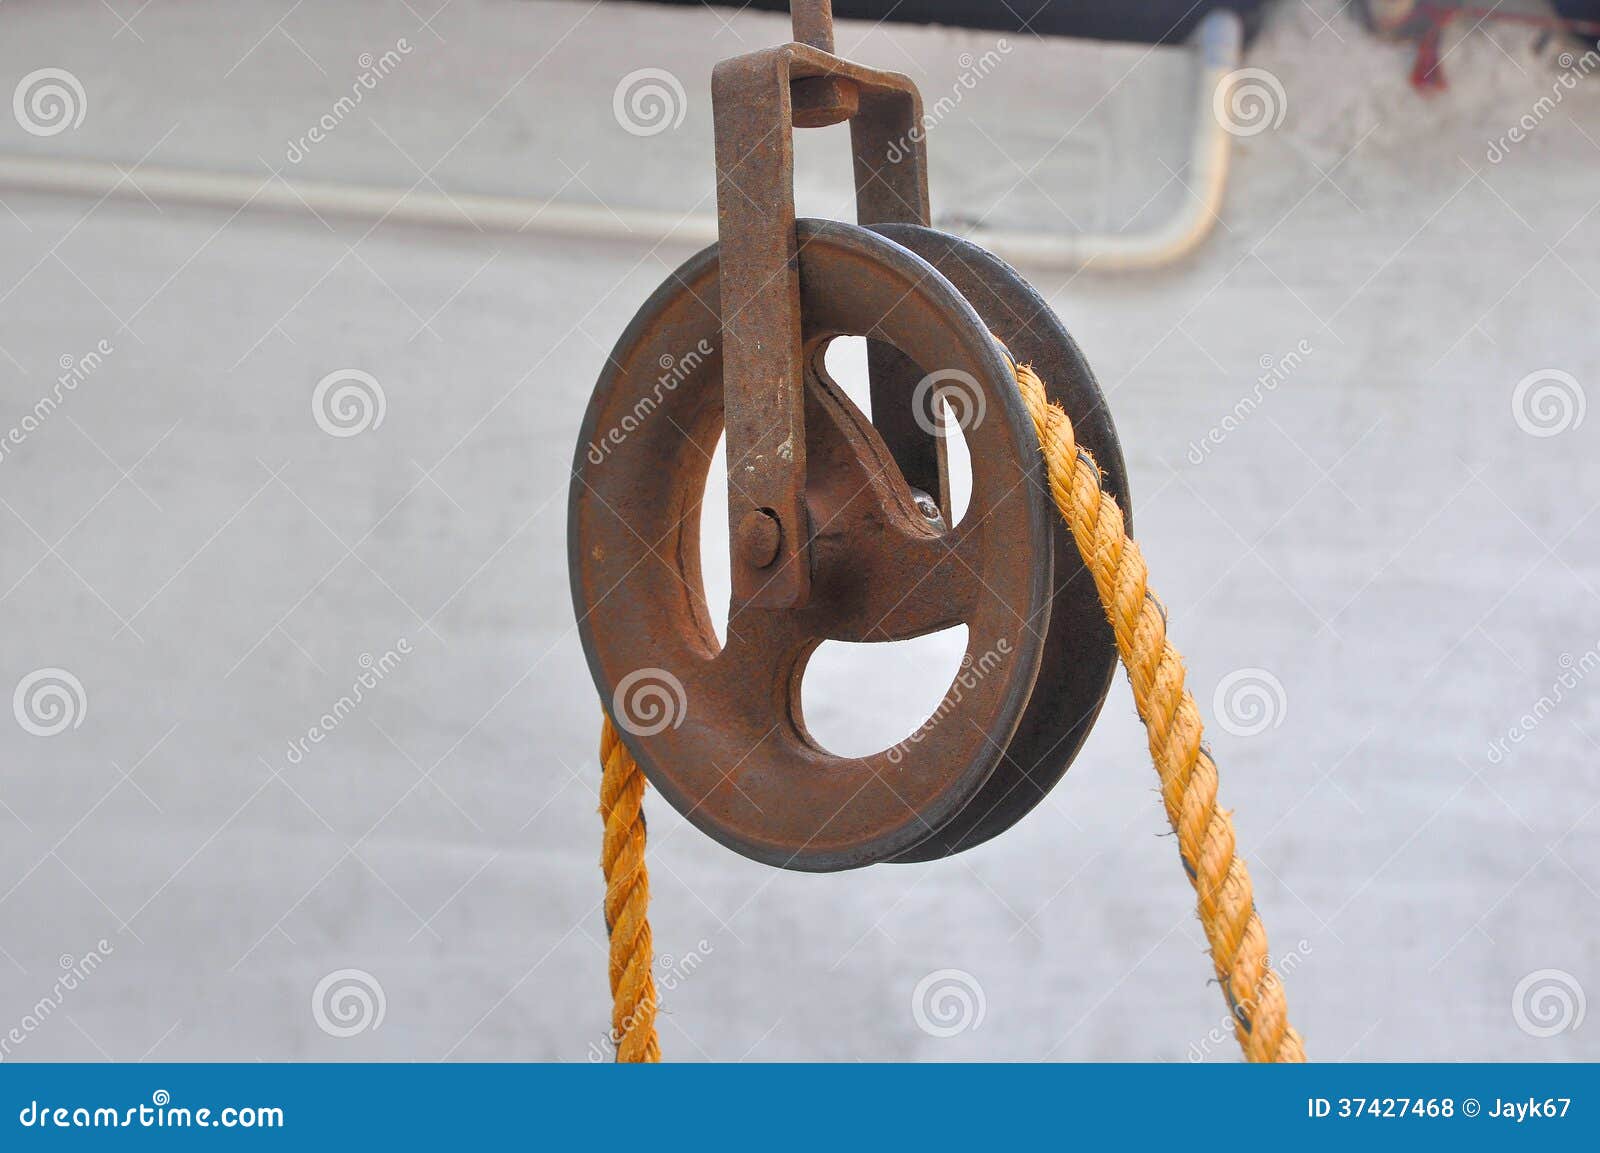 https://thumbs.dreamstime.com/z/pulley-rope-used-wells-to-pull-water-37427468.jpg